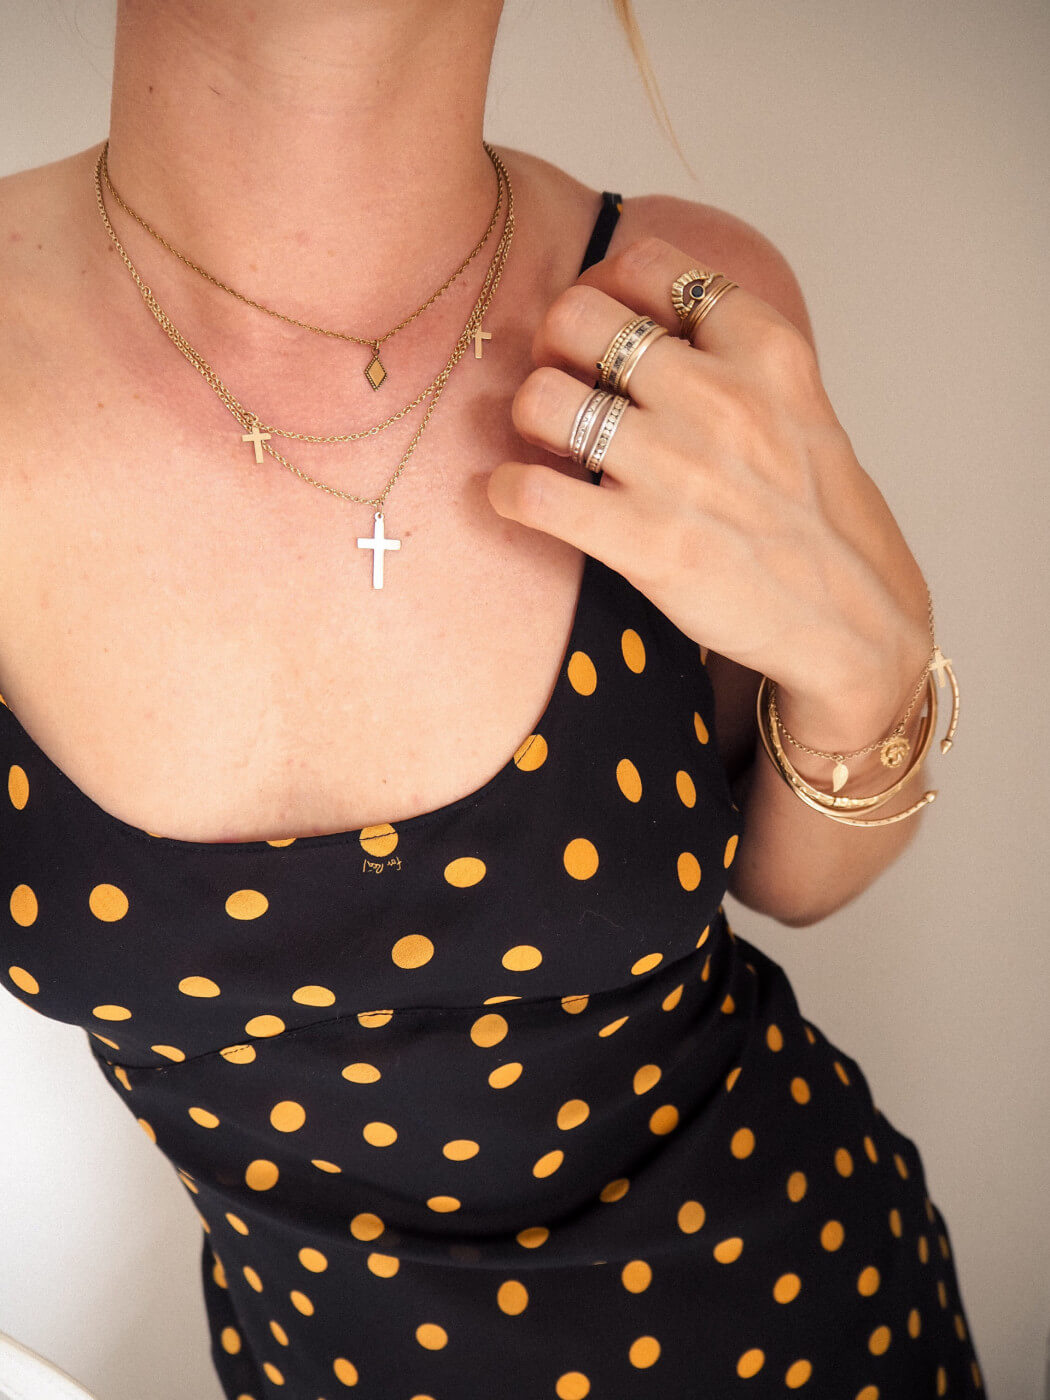 HOW TO STYLE LAYERED JEWELLERY